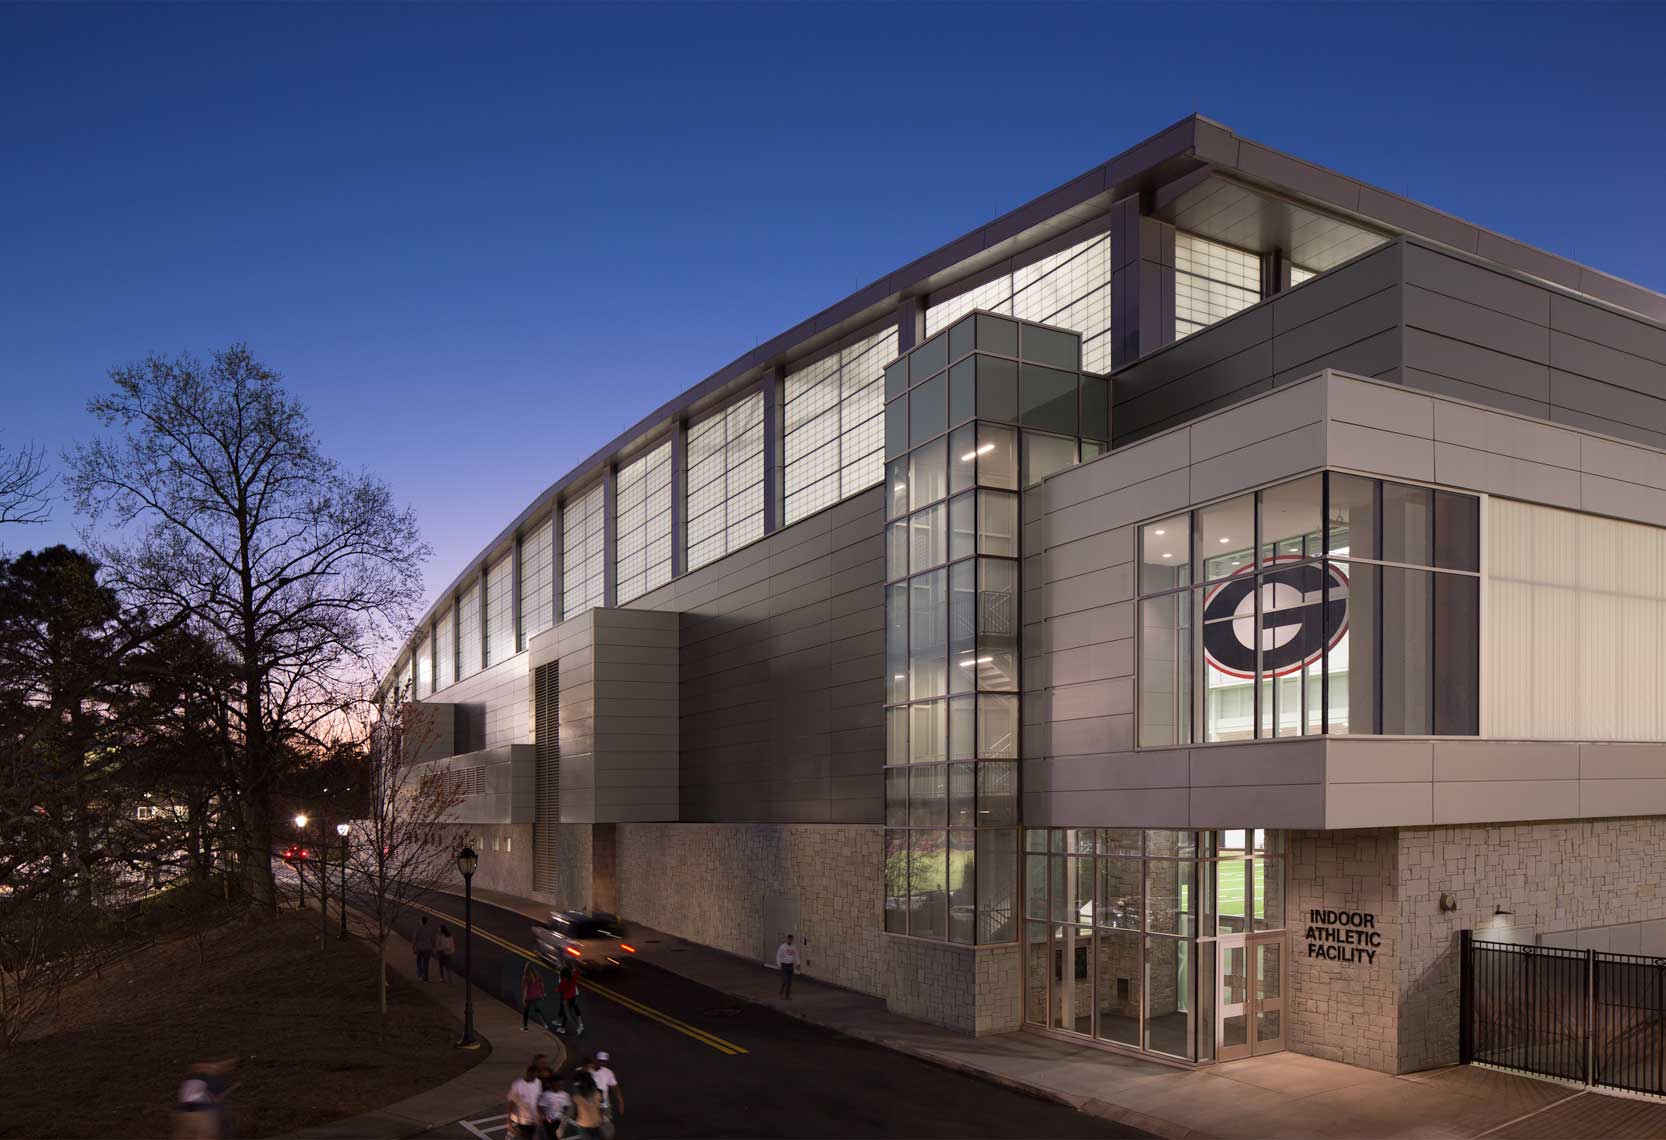 University of Georgia Indoor Athletic Facility | Exterior Entrance at Twilight<br>Collins Cooper Carusi Architects / Ratio / Sherman Construction Company